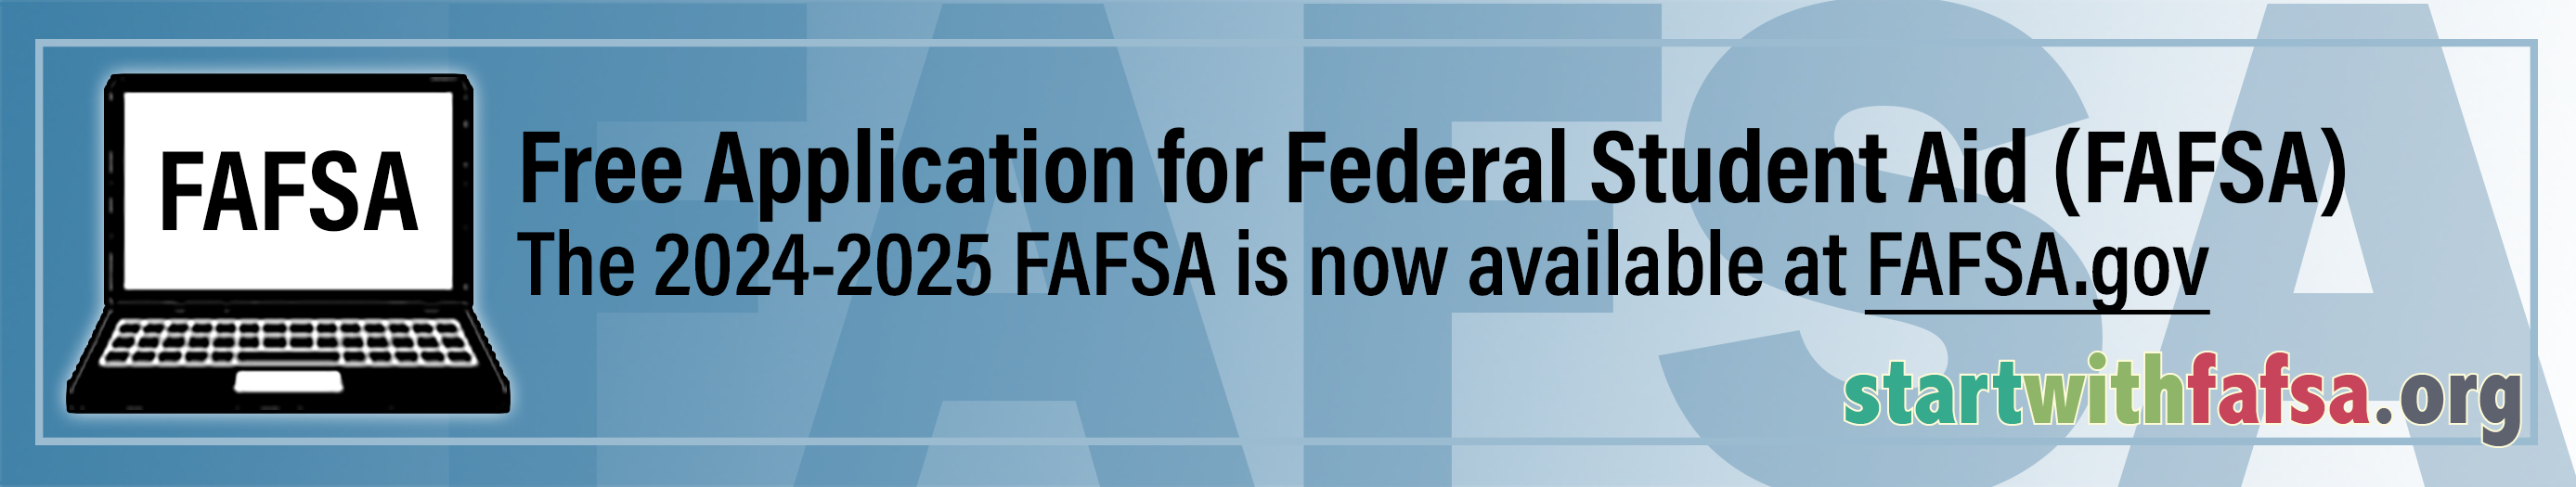 The new FAFSA filing date is October 1. Learn more at Start With FAFSA dot org.